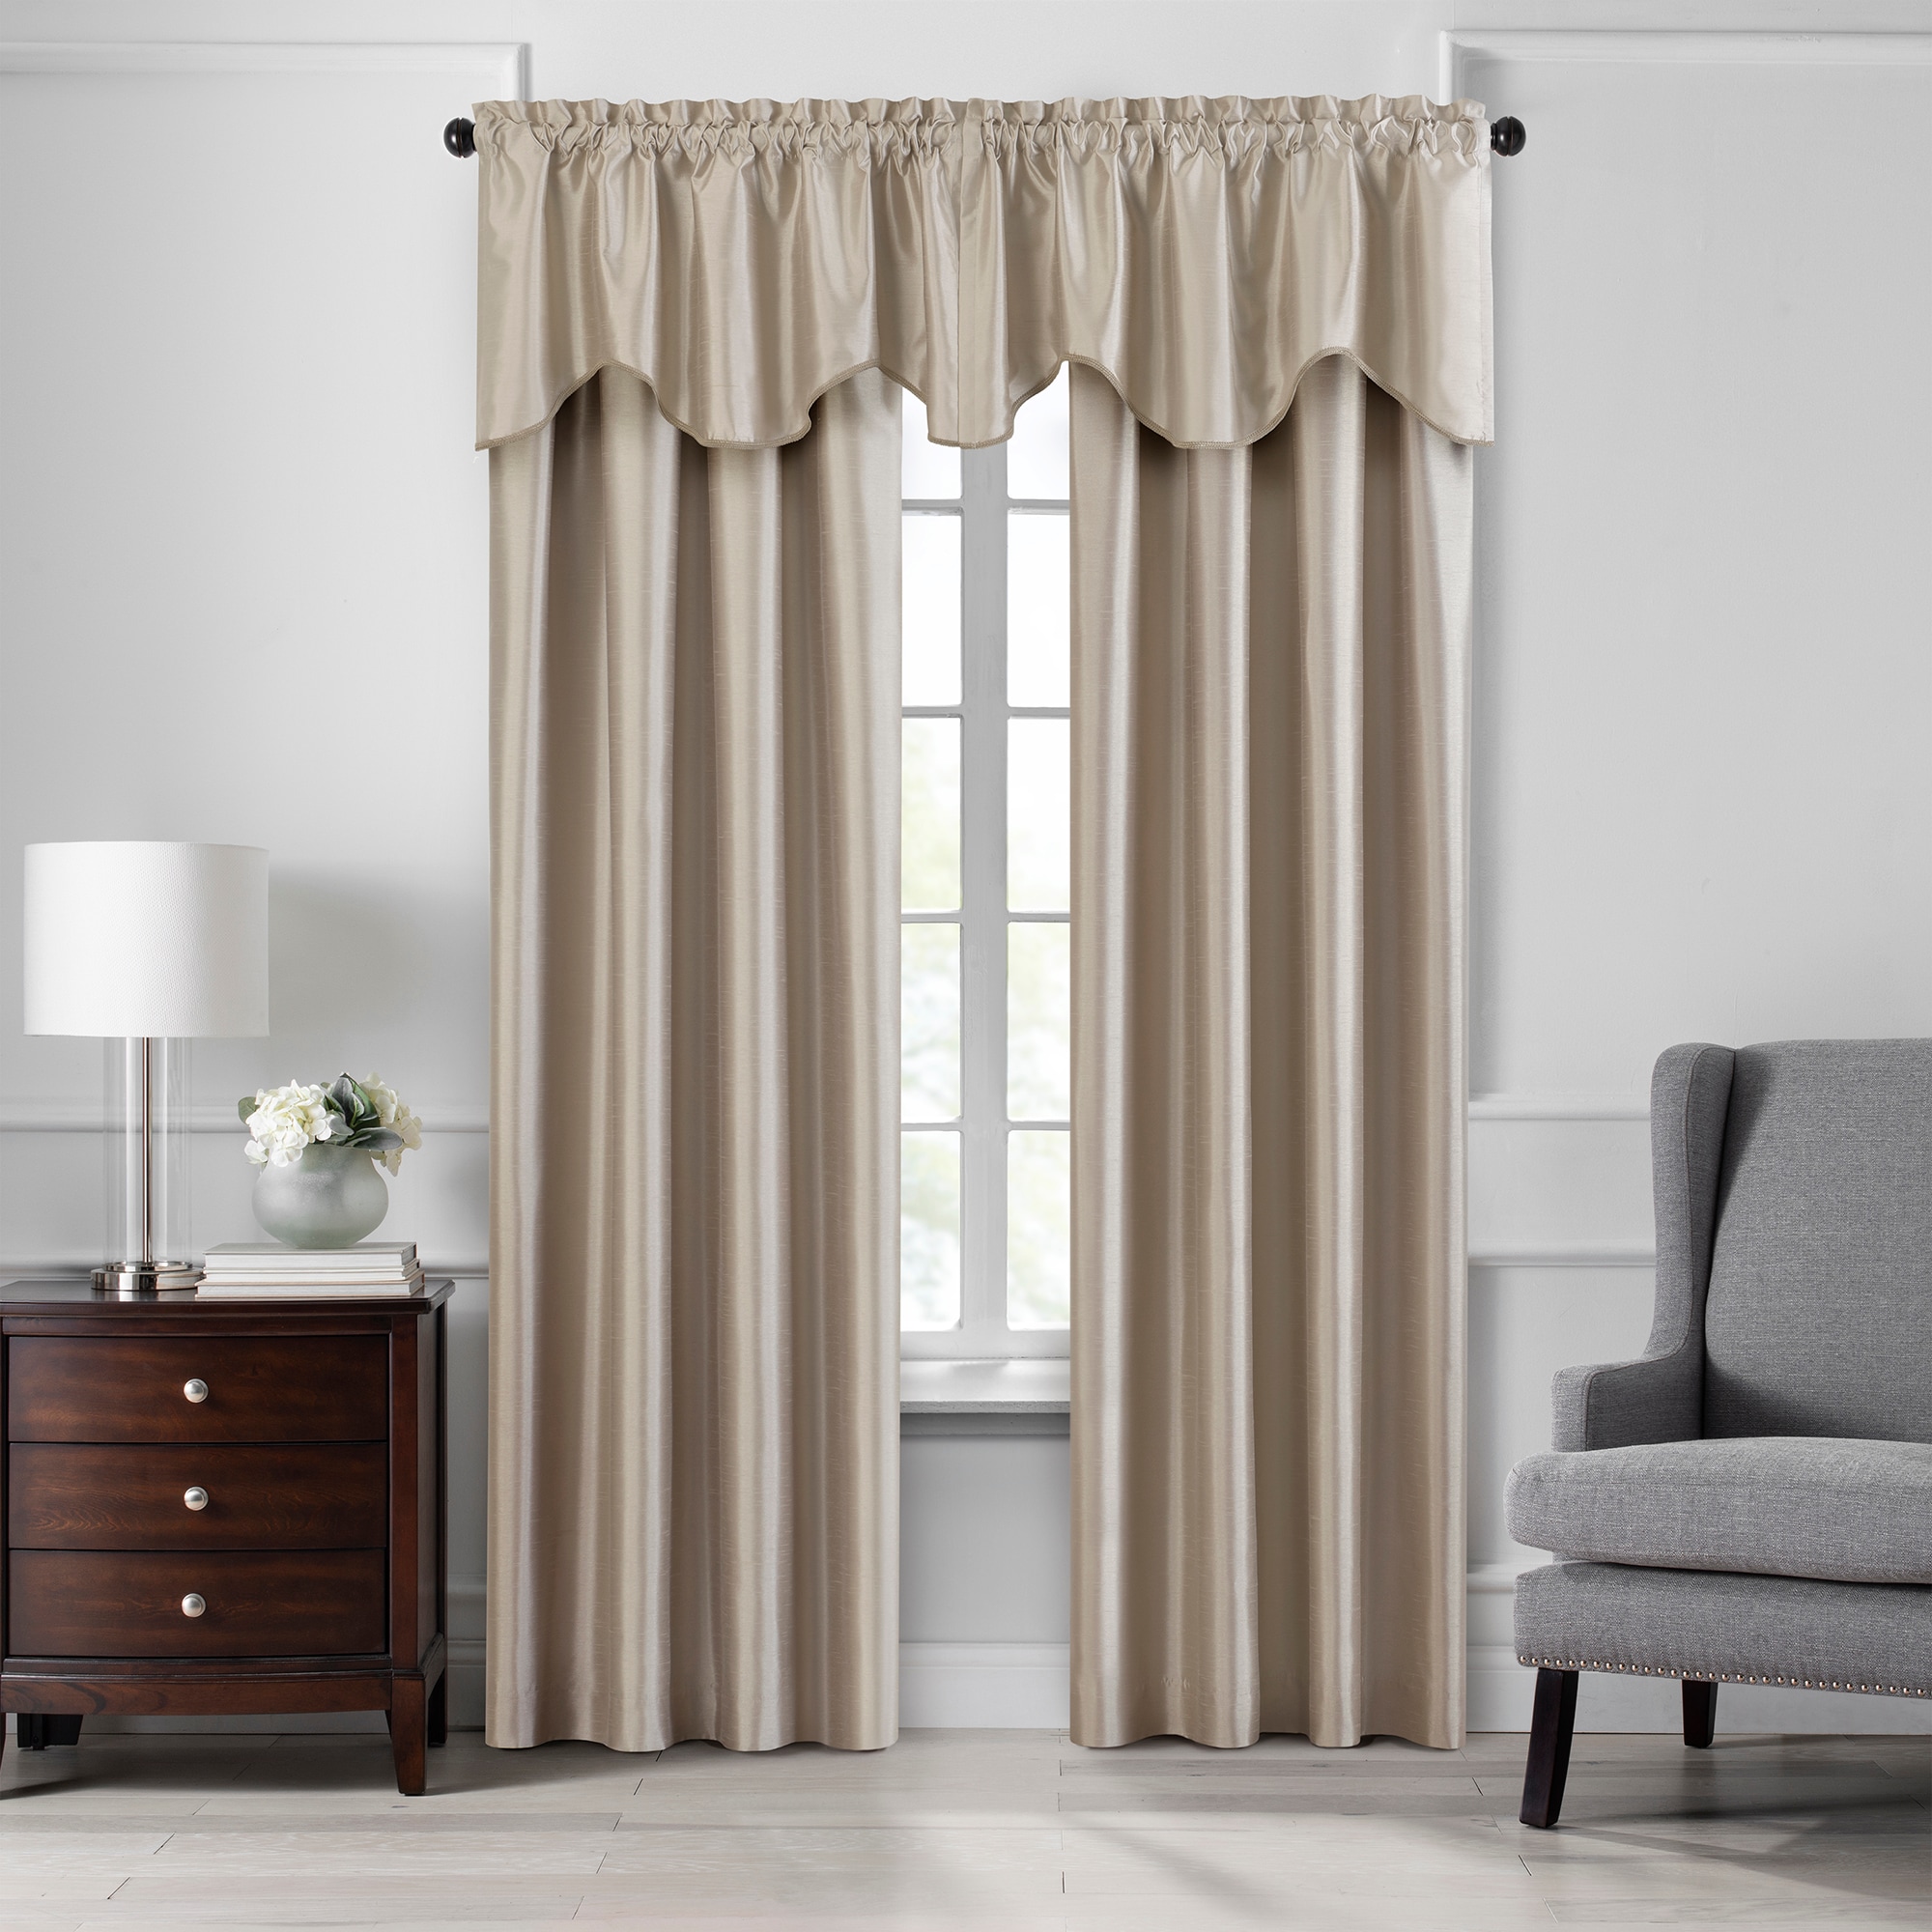 Drapes & Pocket Curtain Single Lined Taupe Curtains in Panel 95-in Standard Elrene department Fashions at Home Rod the Blackout